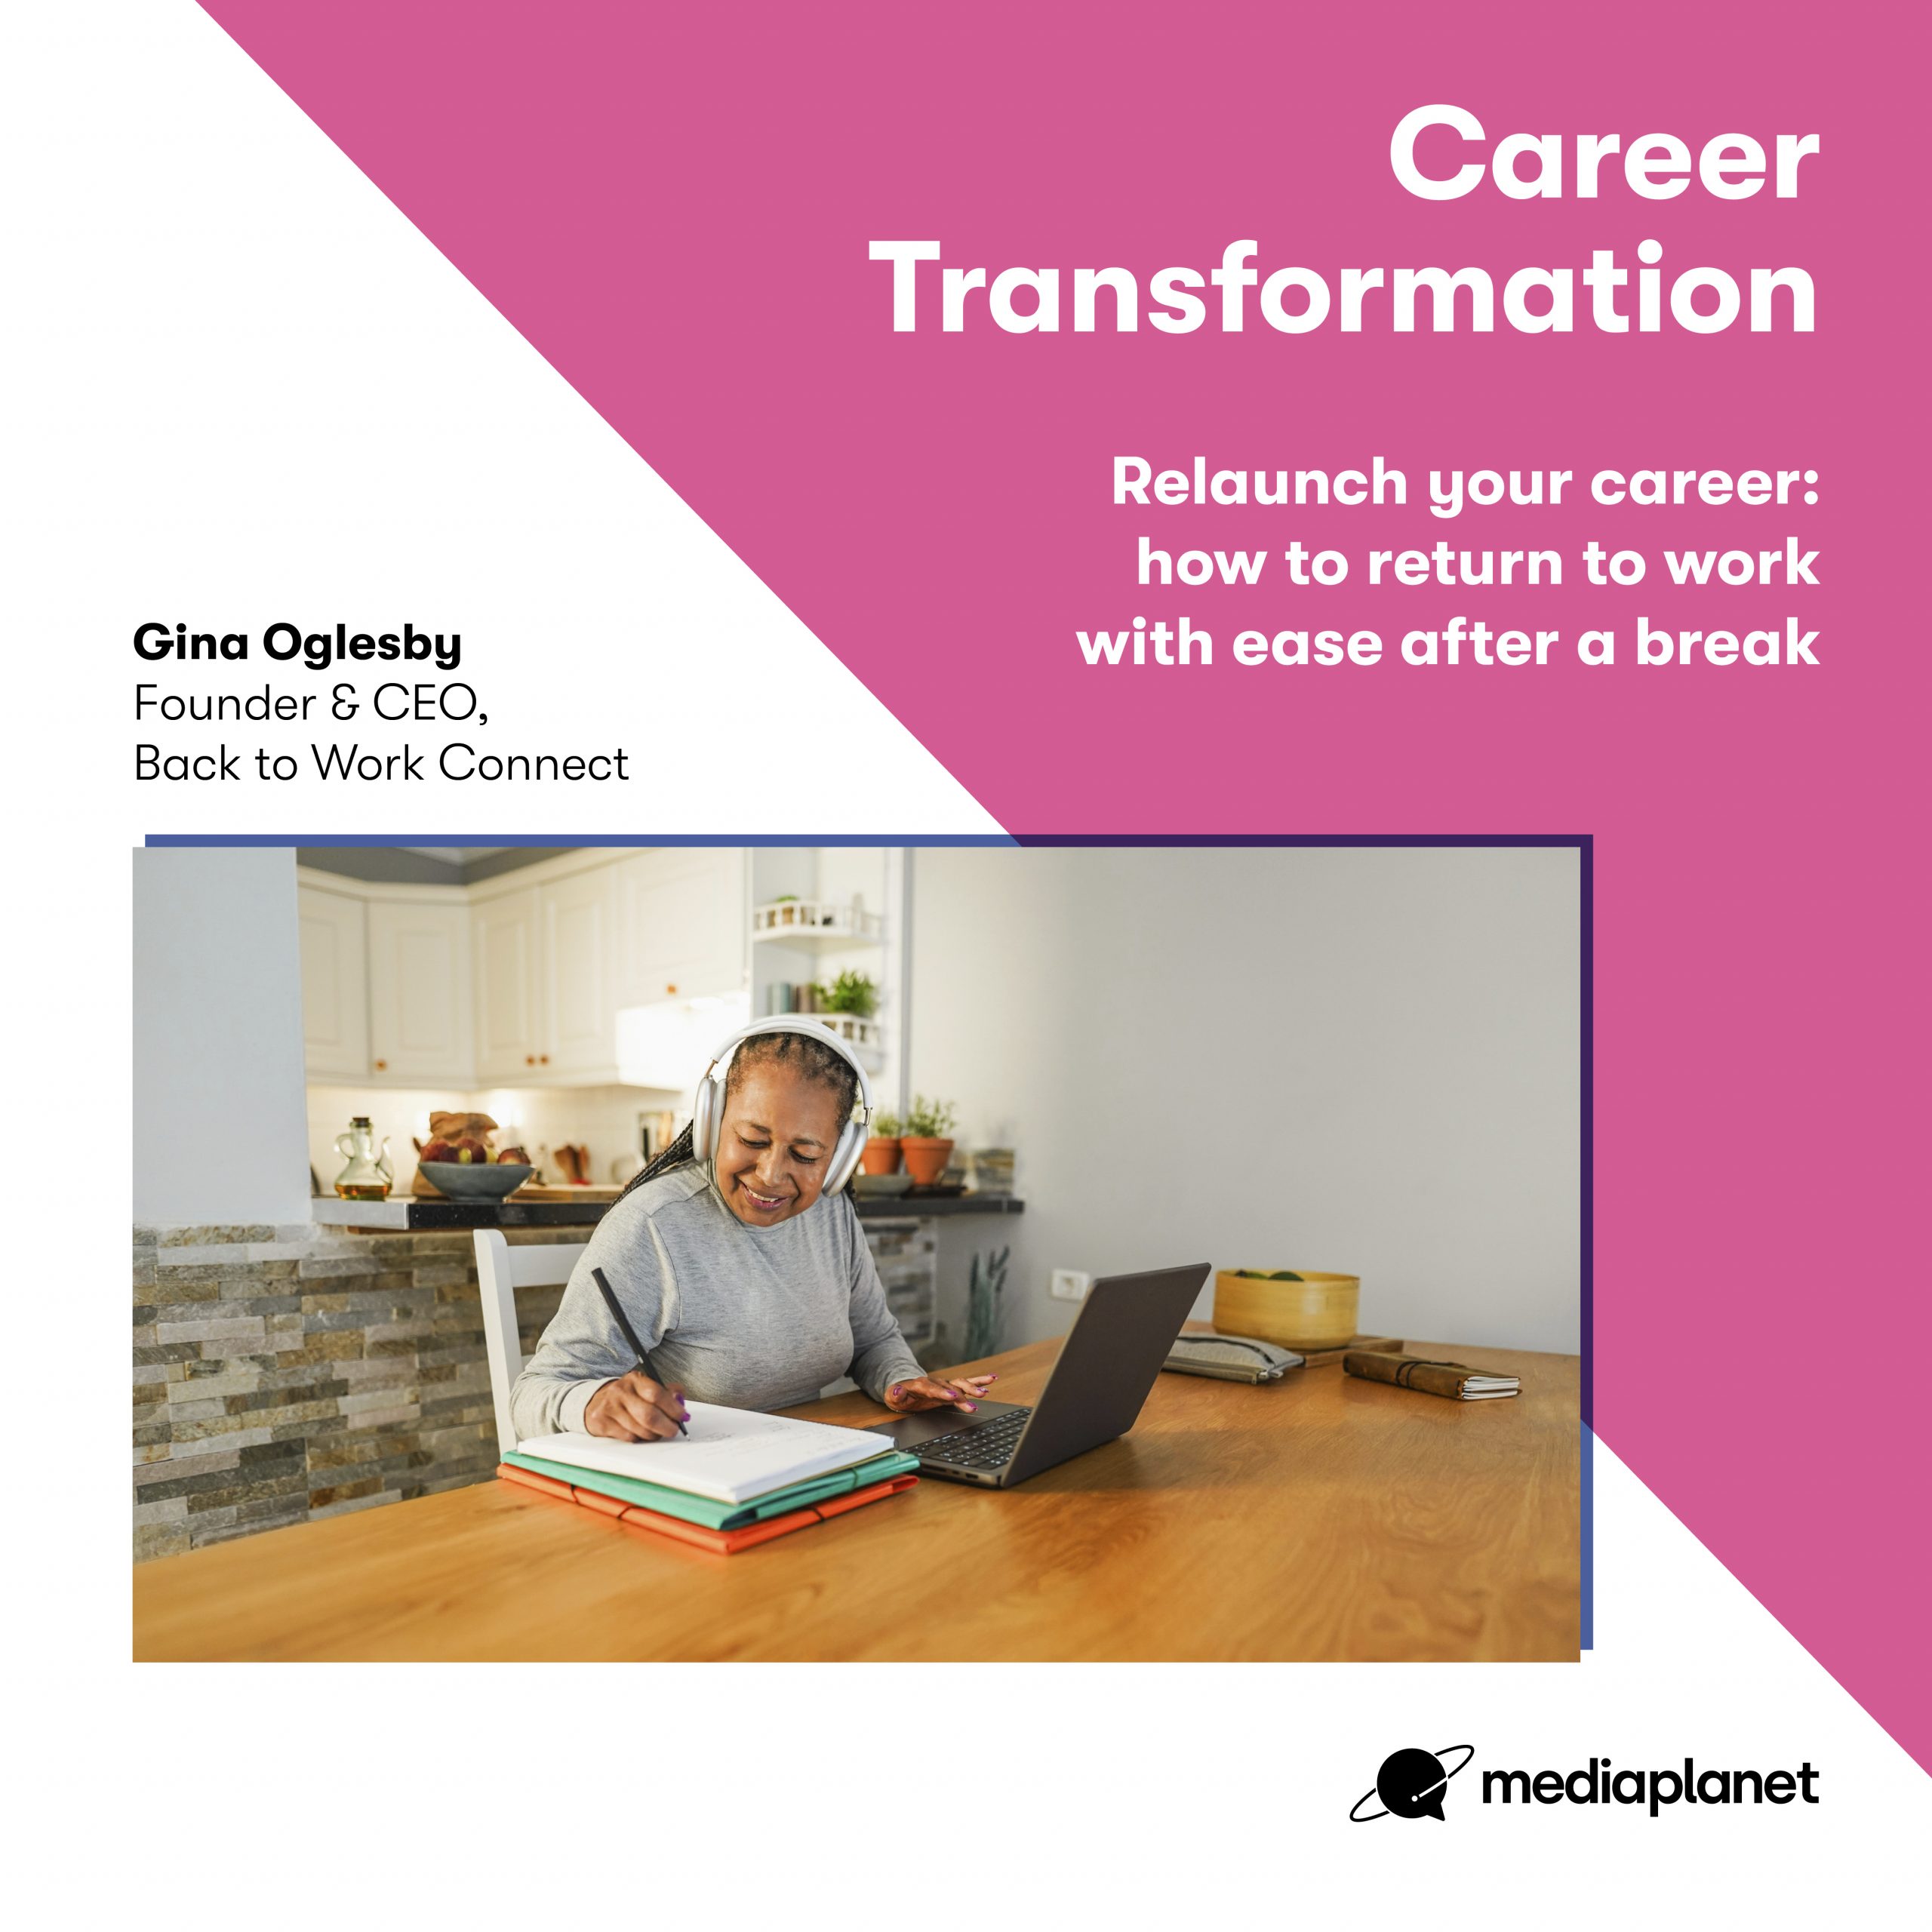 Relaunch your career: how to return to work with ease after a break